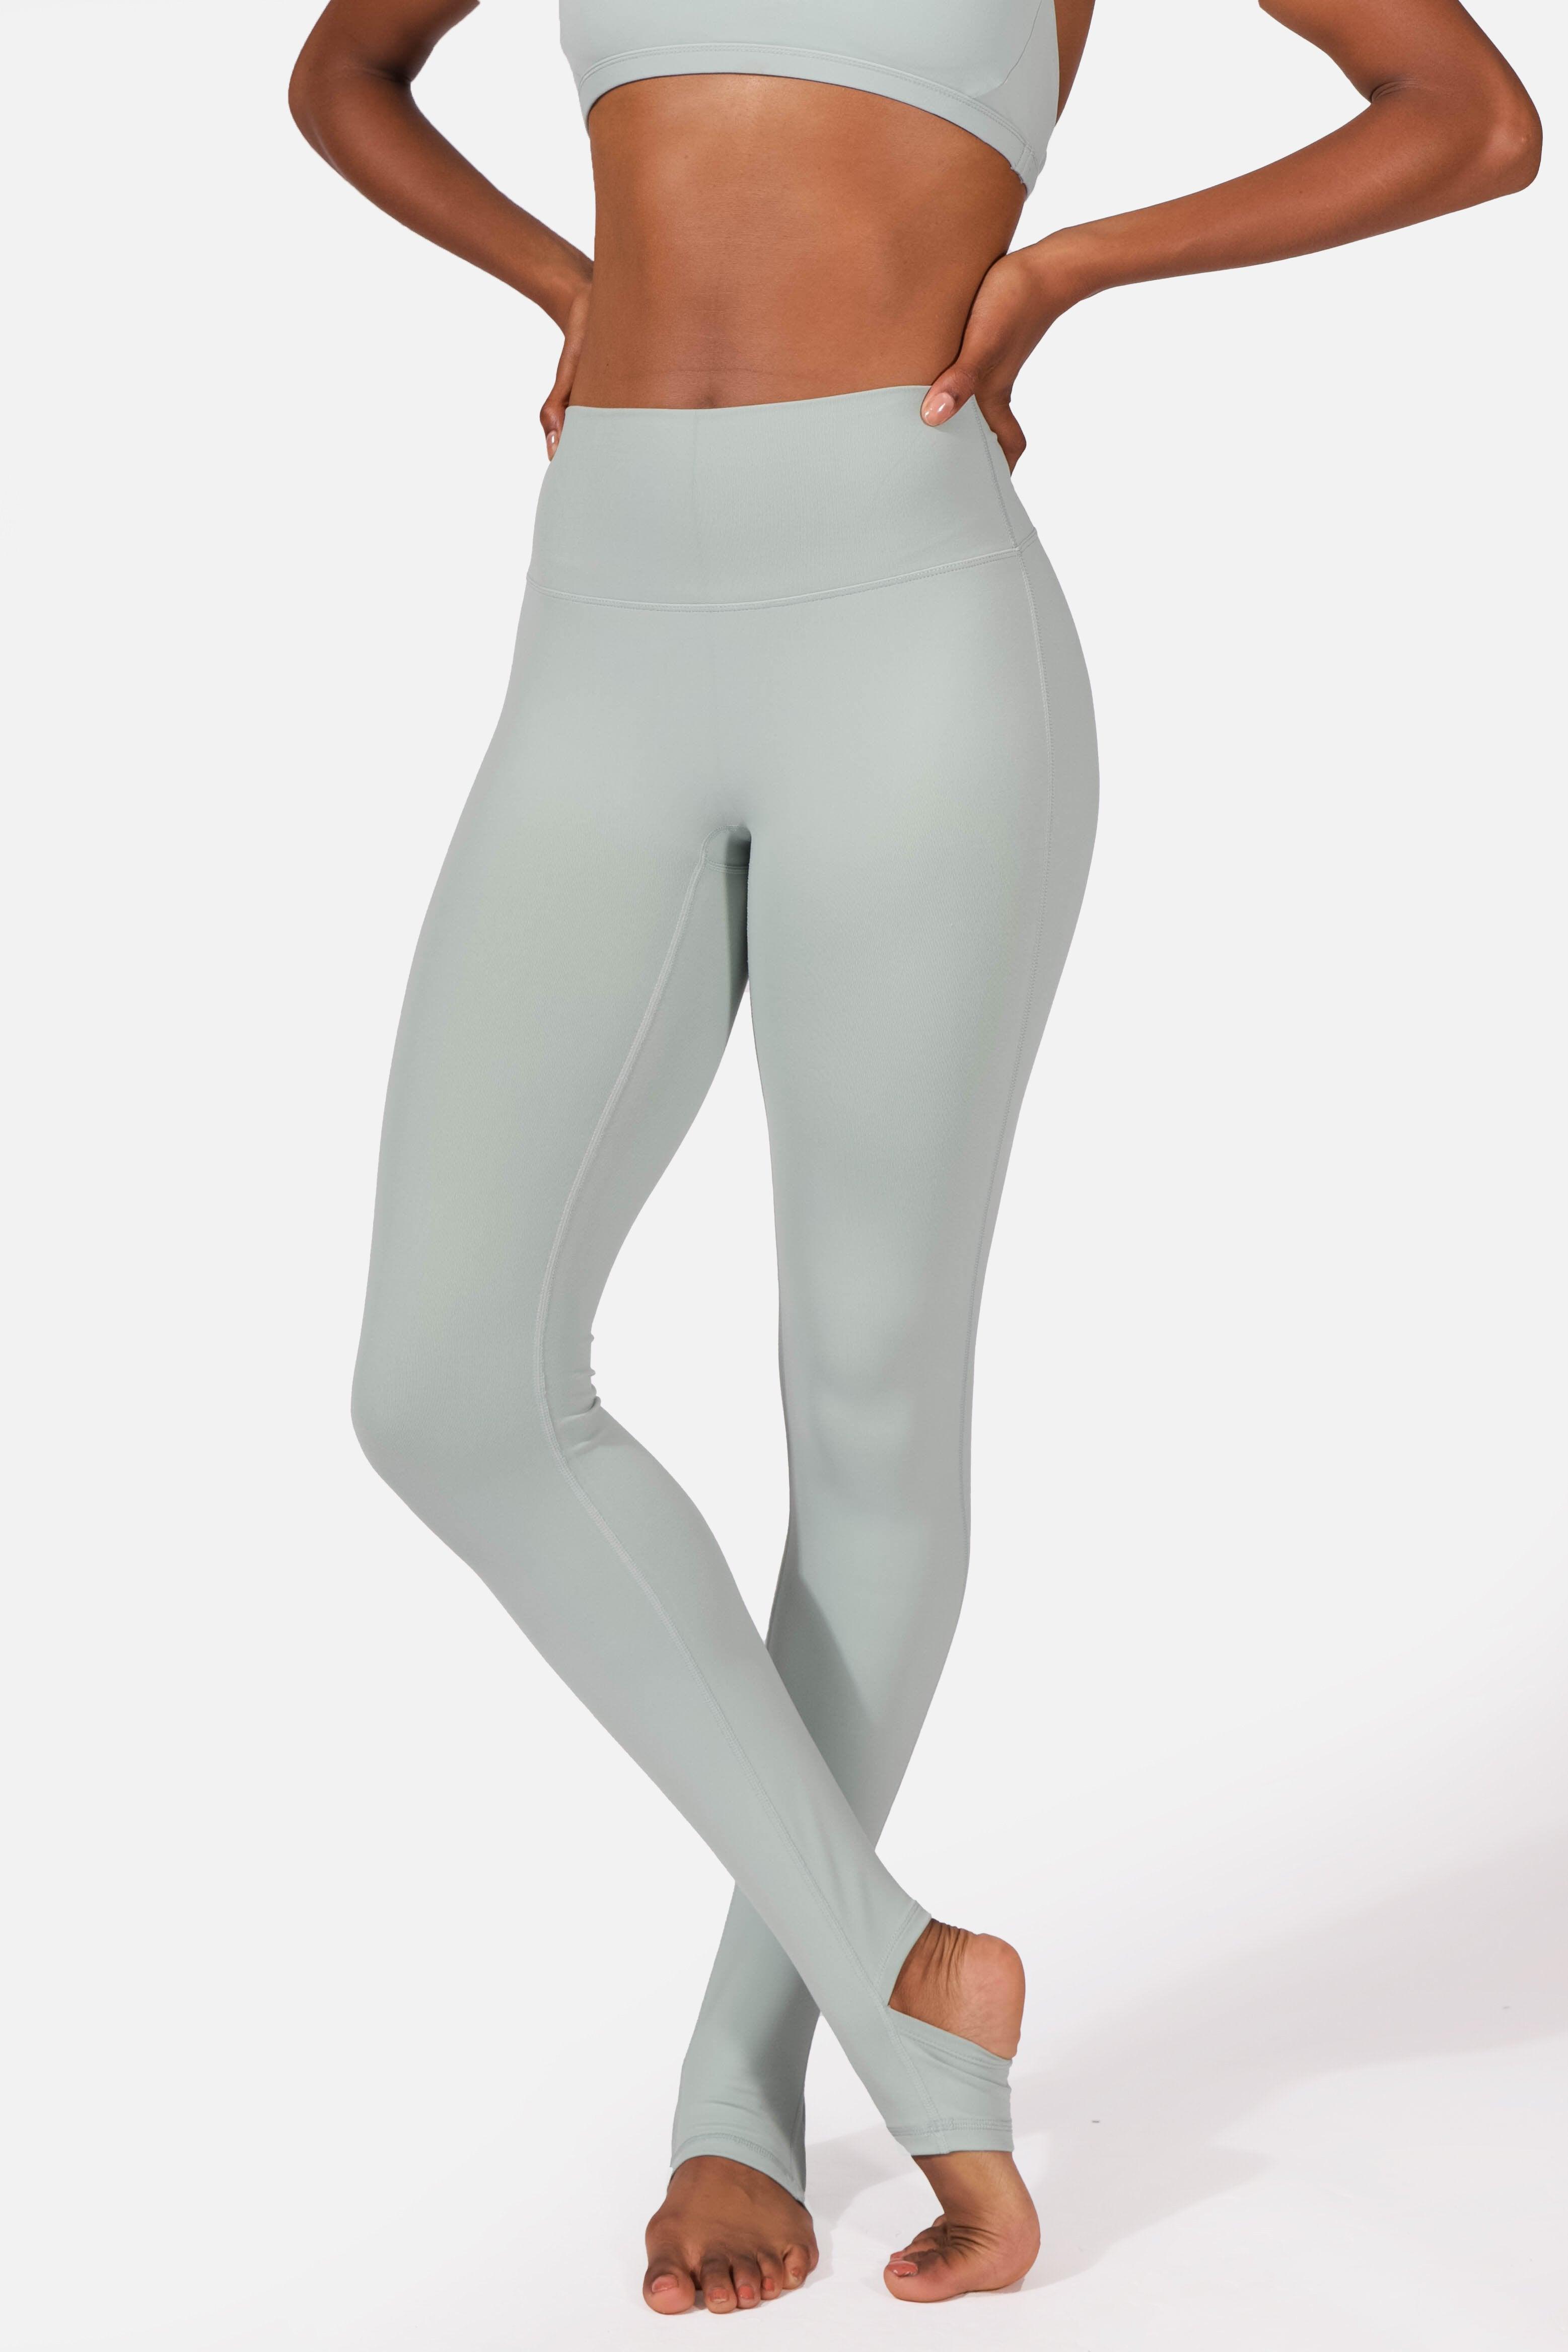 Solid color mesh see through yoga pants – Scarlet Diamond Boutique